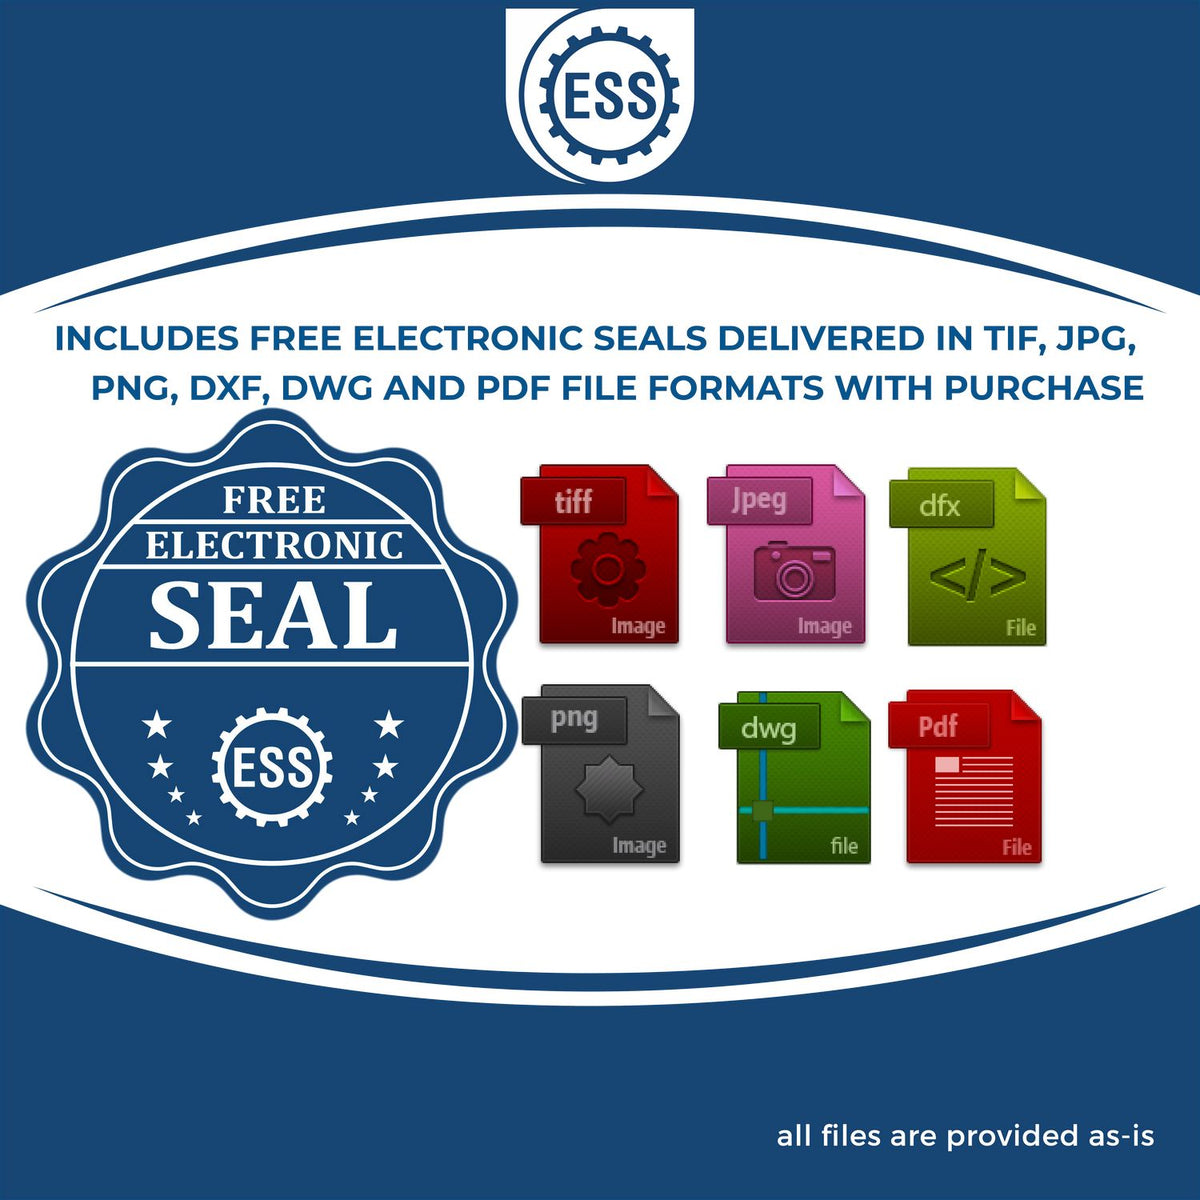 An infographic for the free electronic seal for the Heavy Duty Cast Iron Wyoming Geologist Seal Embosser illustrating the different file type icons such as DXF, DWG, TIF, JPG and PNG.